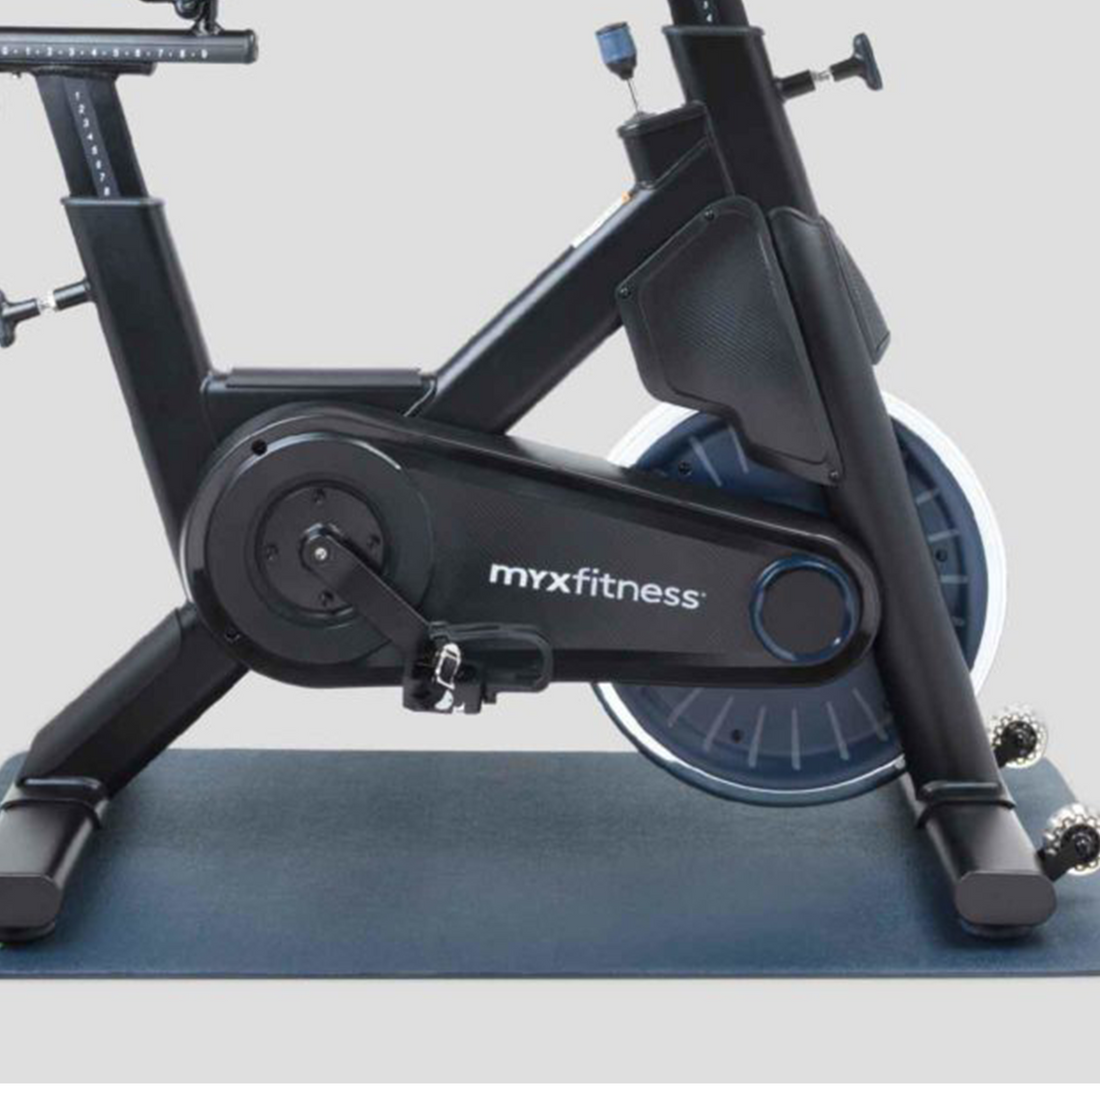 Myx Fitness Bike: Pros and Cons - Fitness Health 